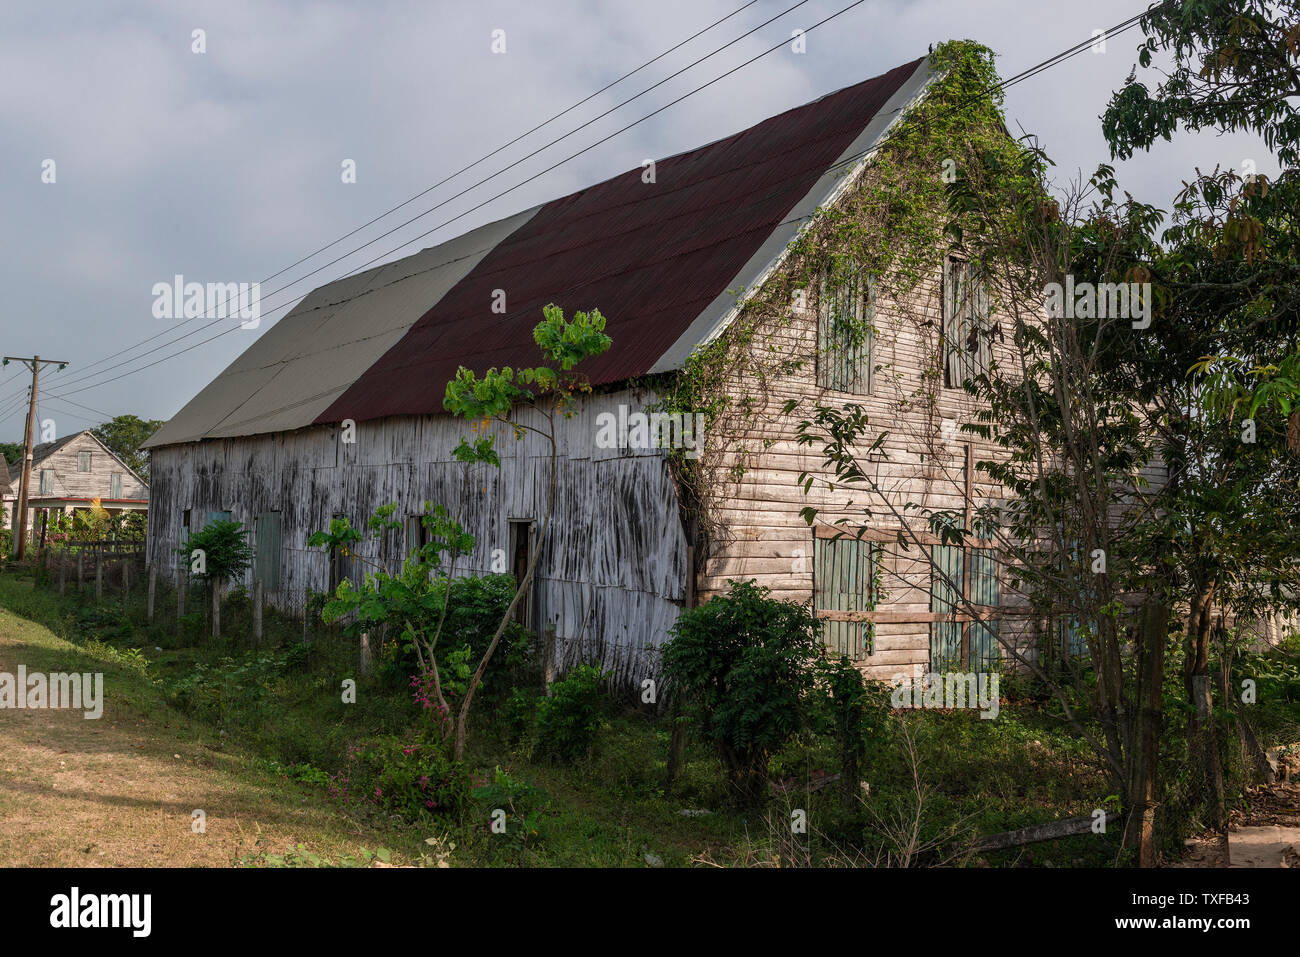 Tobacco drying shed  in the rural village of San Juan y Martinez, Pinar del Rio Province, Cuba Stock Photo